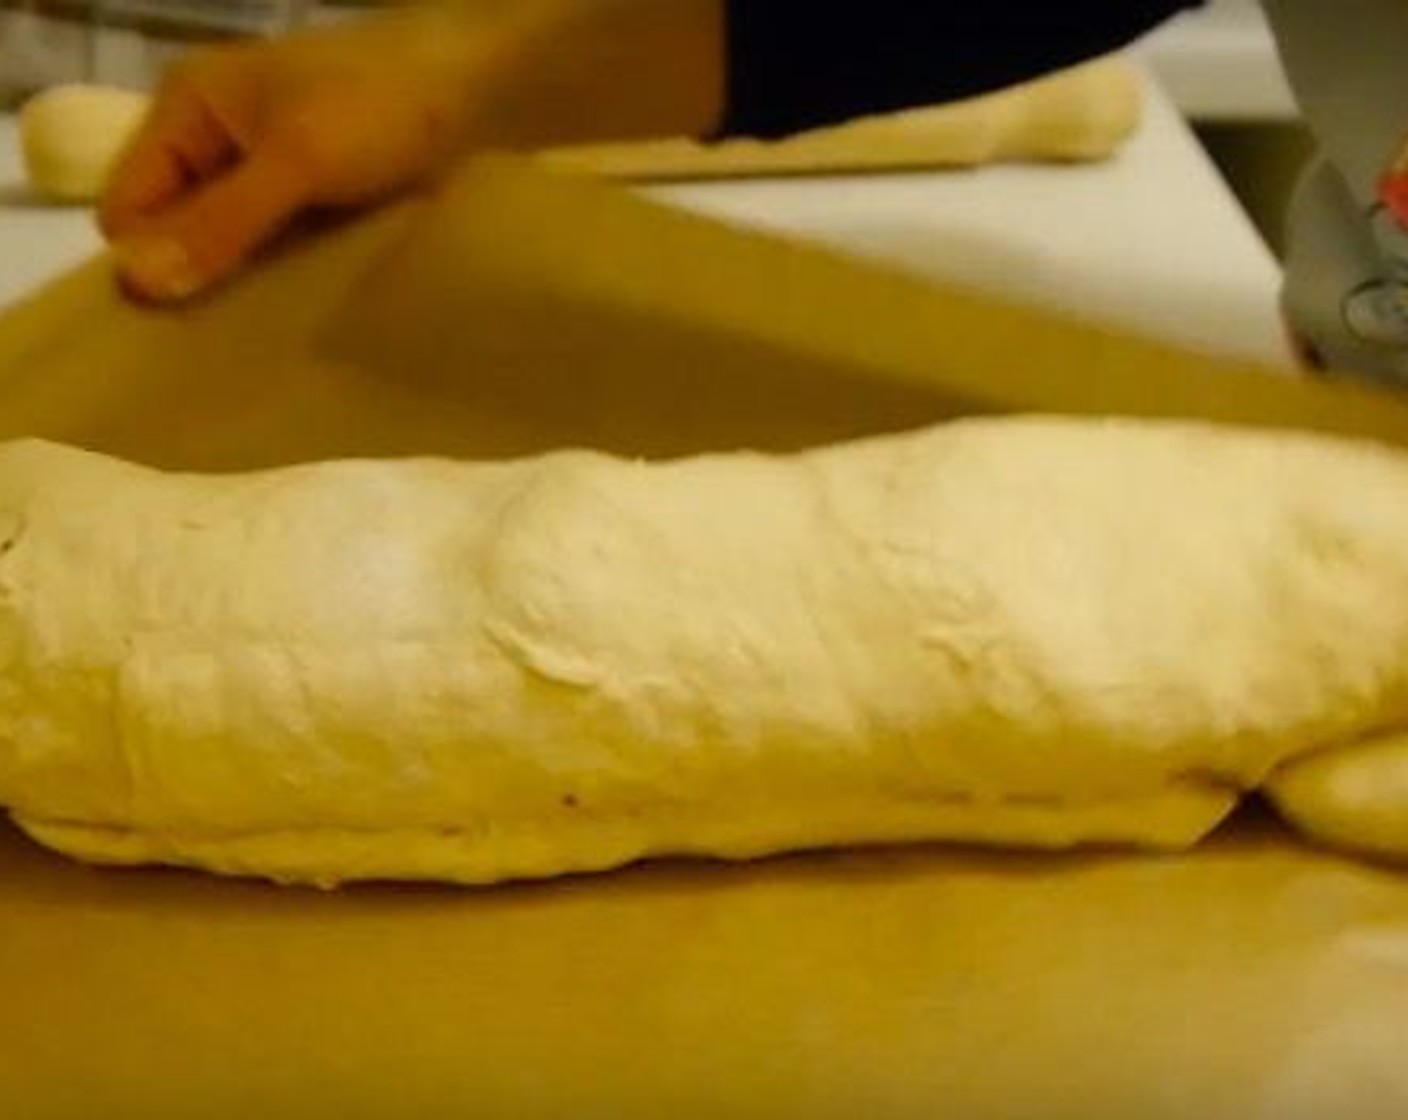 step 8 Once the dough is fully rolled and a "sausage" like bread has been created, move it to a baking tray lined with parchment paper.